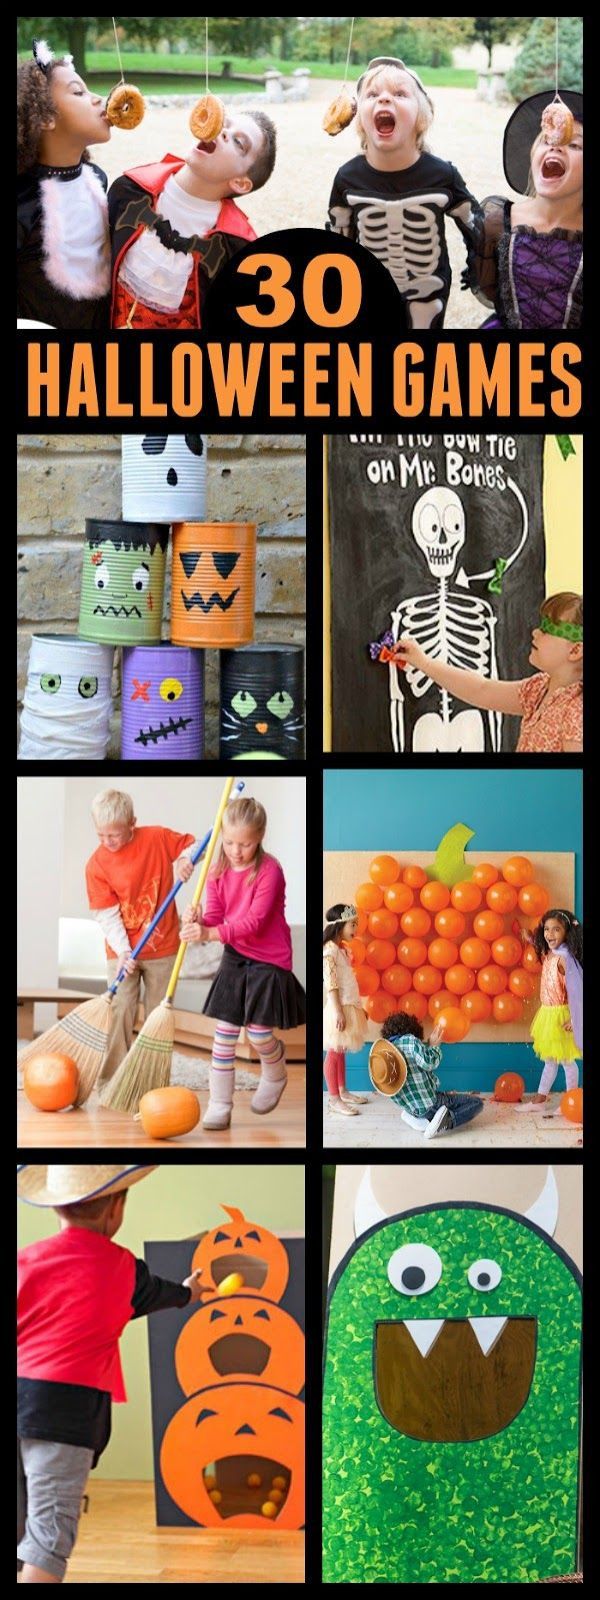 Preschool Halloween Party Game Ideas
 Halloween Games for Kids Party Ideas